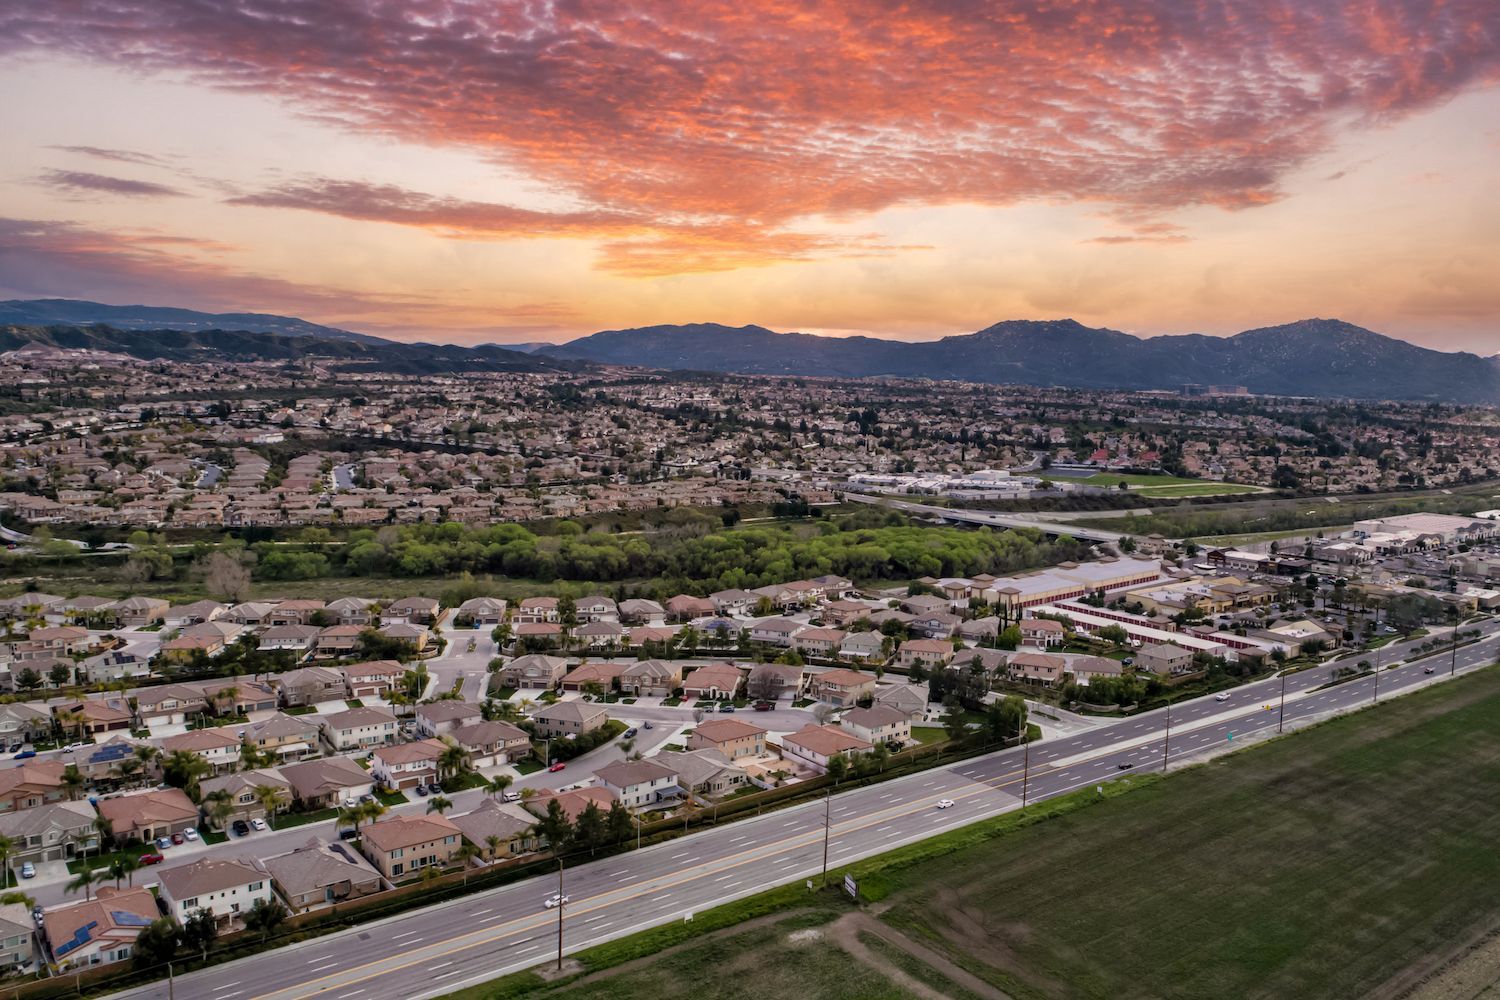 10-facts-about-prominent-industries-and-economic-development-in-murrieta-california